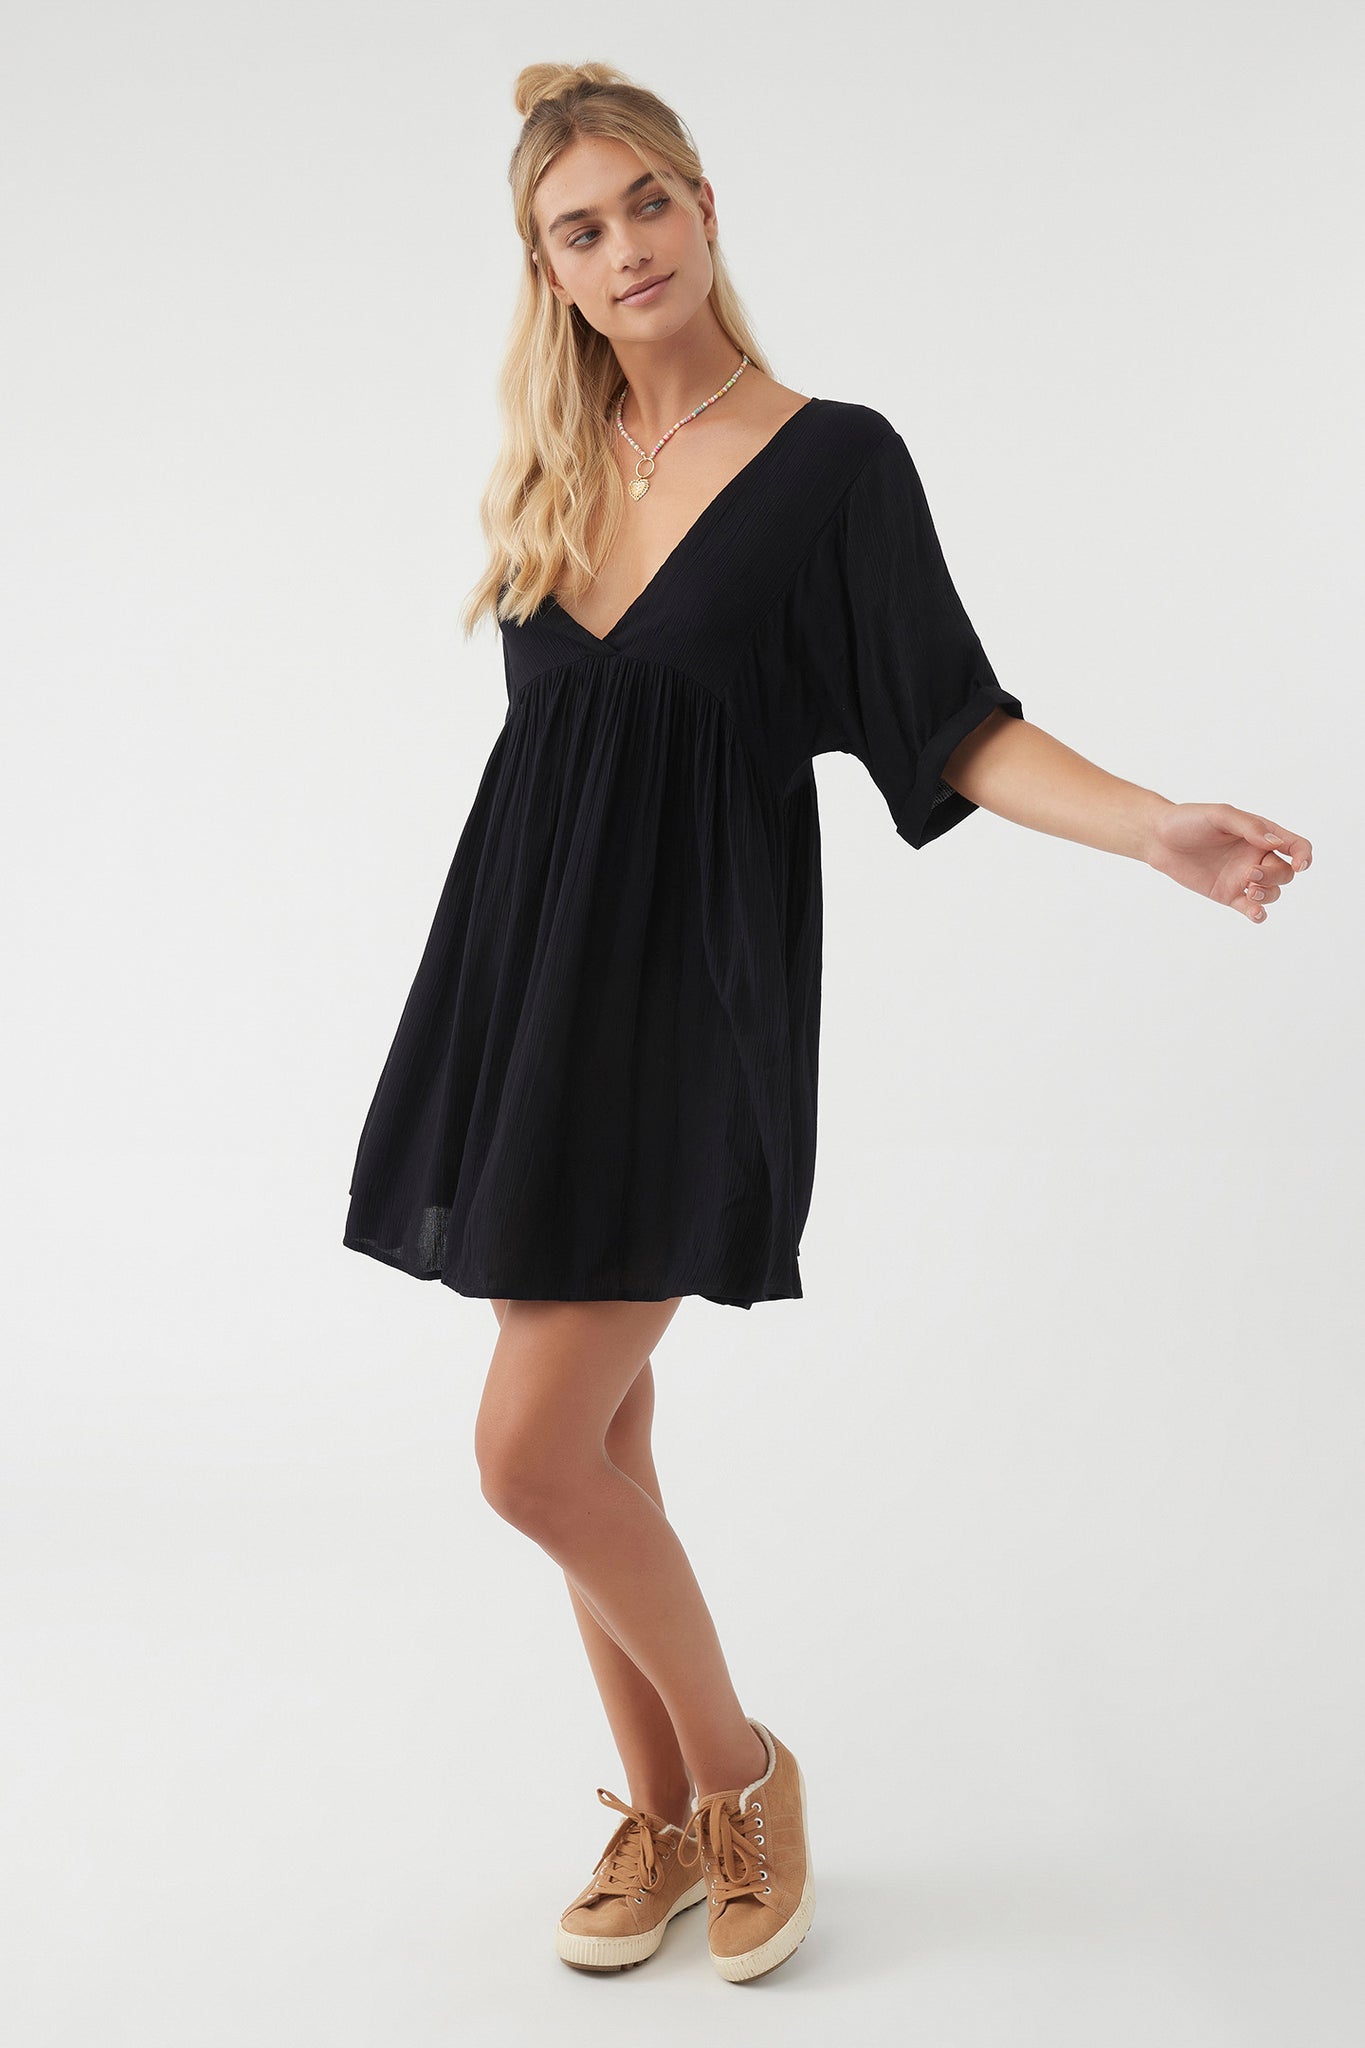 30 Summer Dresses From Free People, J.Crew, and H&M